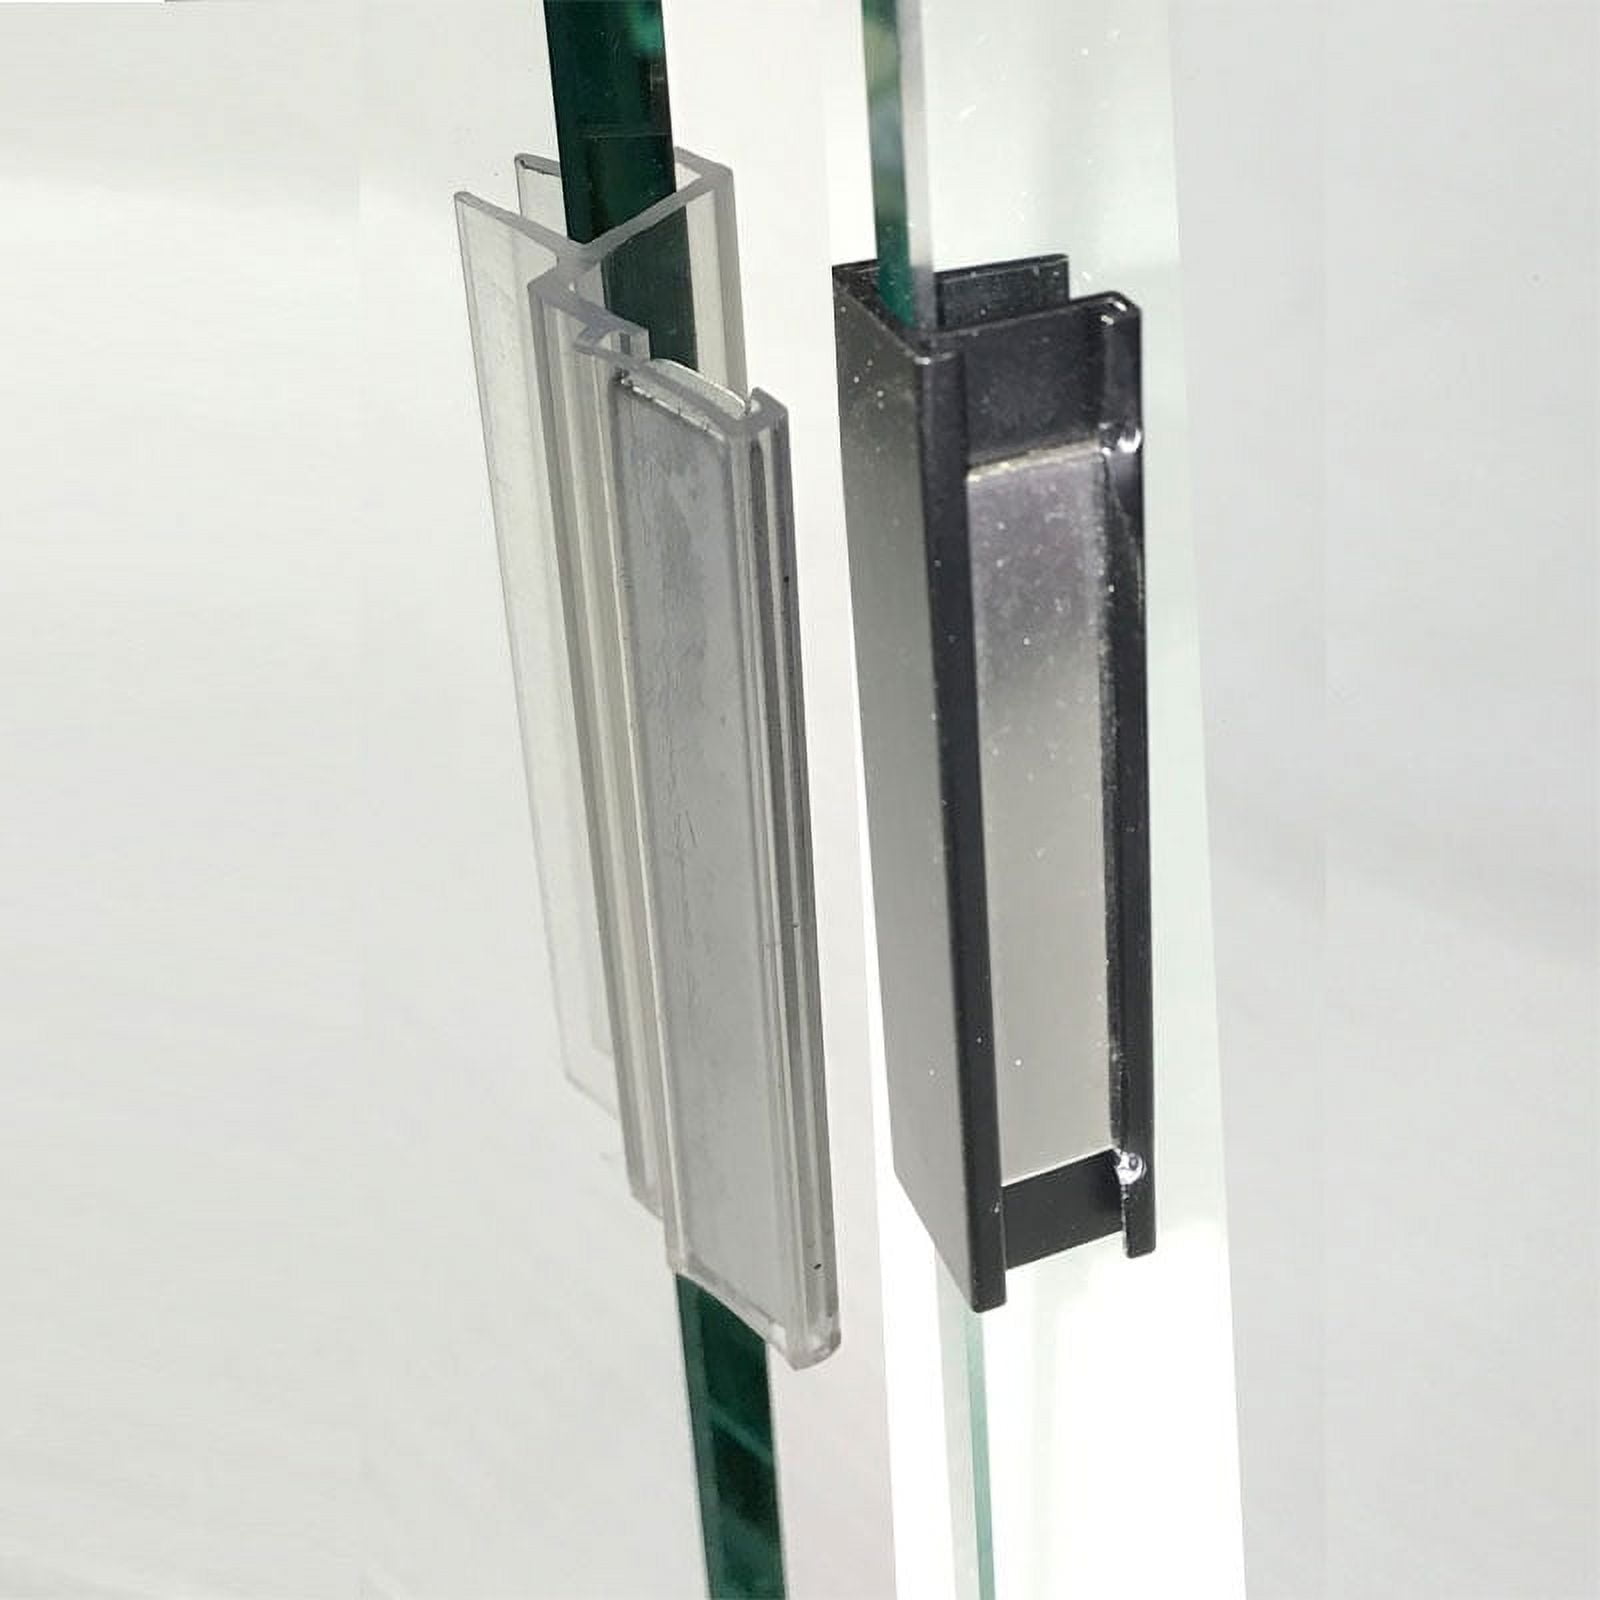 Ø214 x H68mm Clear Polycarbonate Plate Cover